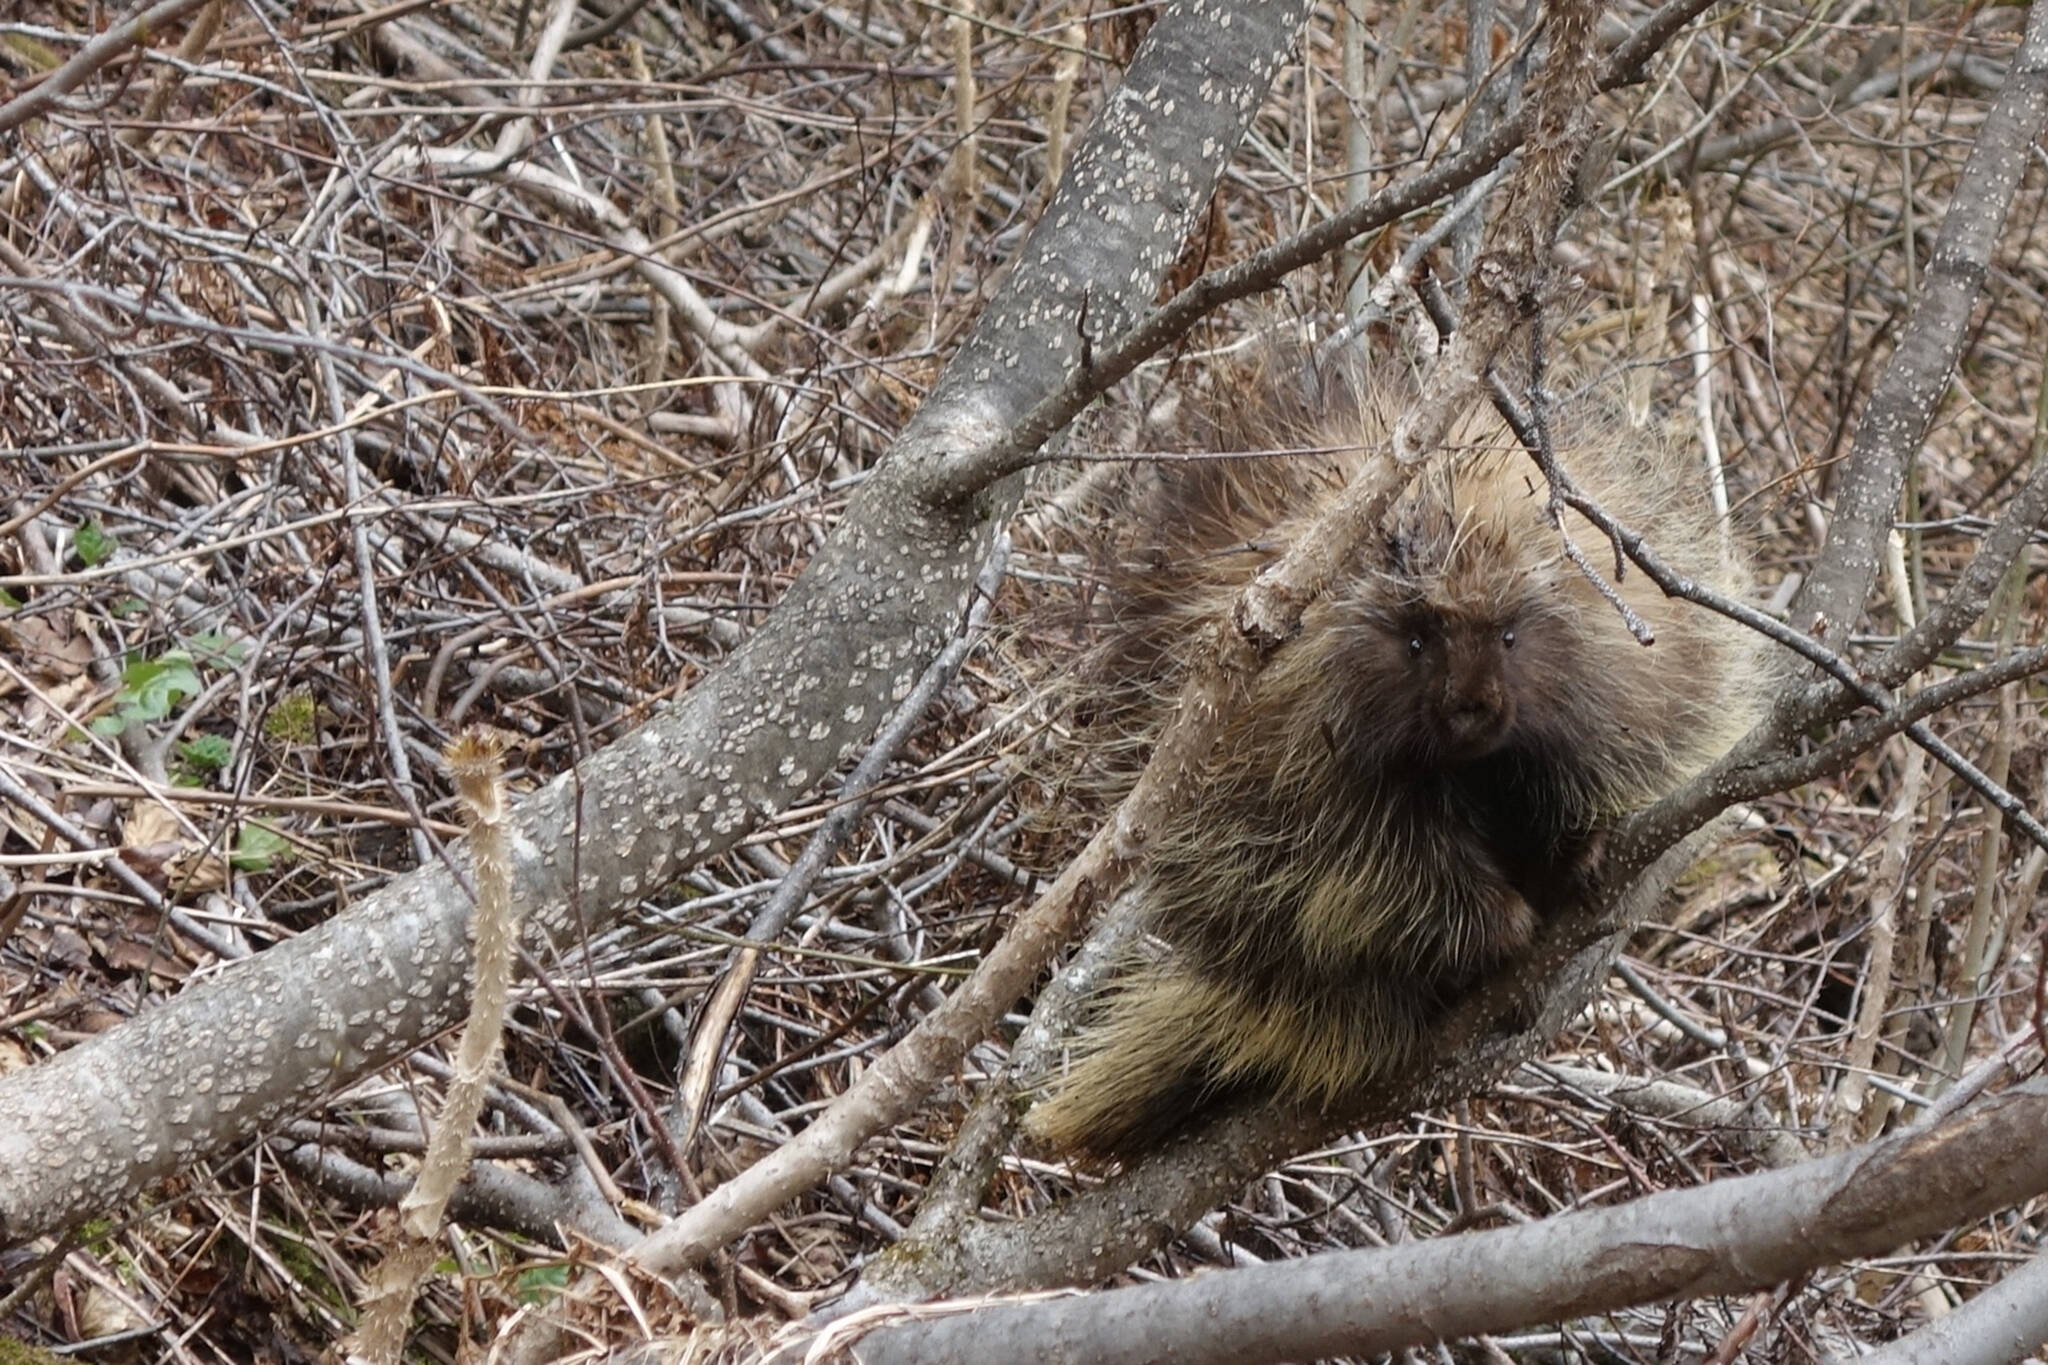 This photo shows a porcupine near Valdez. (Courtesy Photo / Ned Rozell)